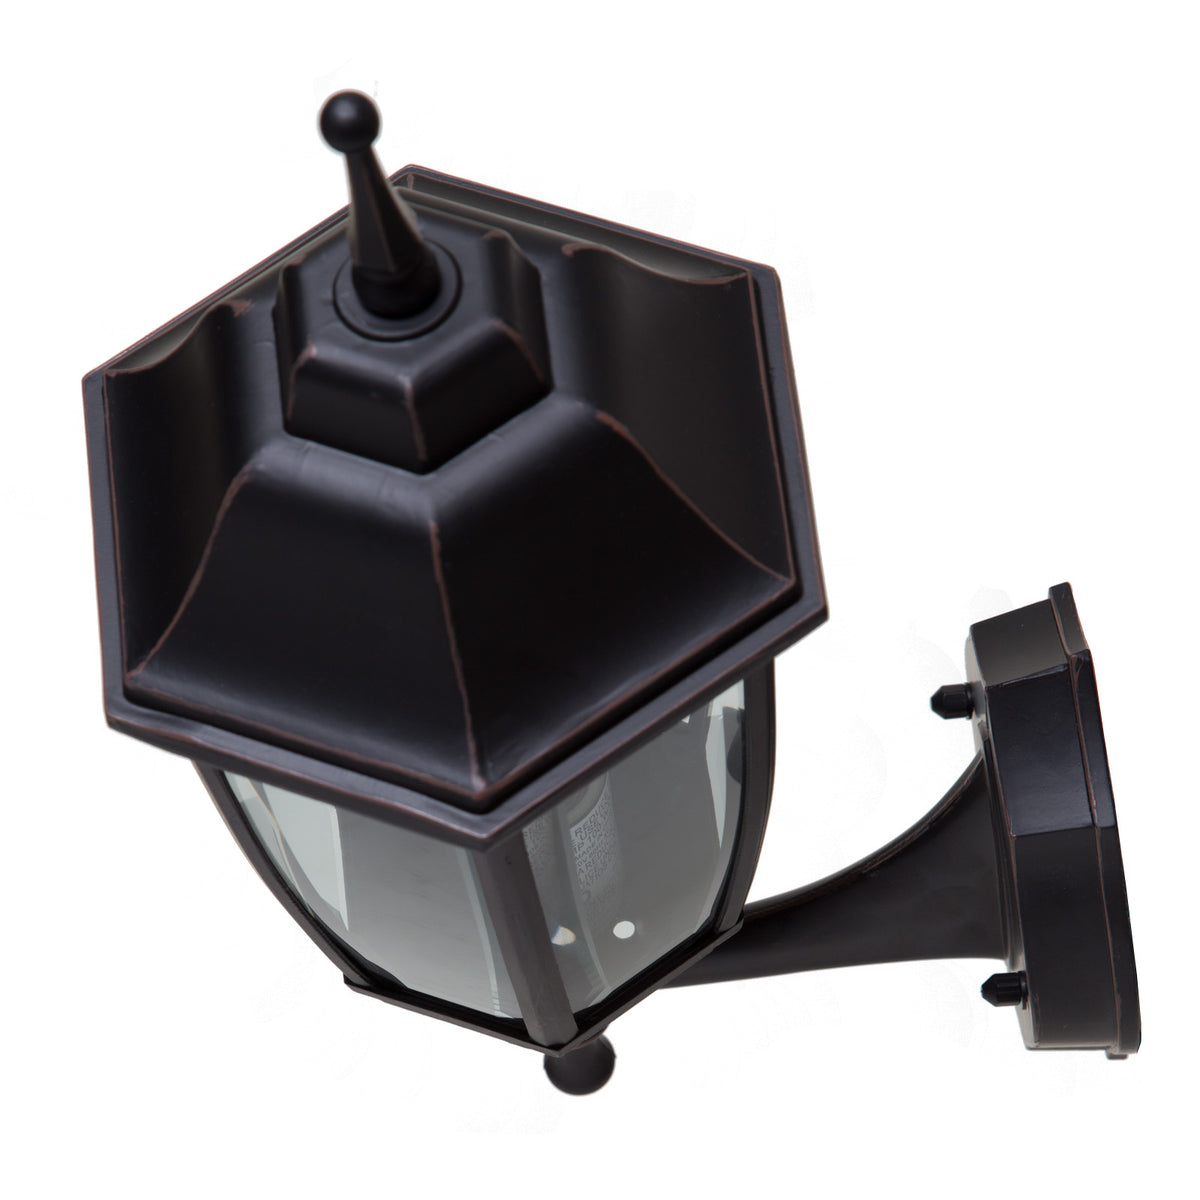 buy outdoor lanterns at cheap rate in bulk. wholesale & retail outdoor decoration supply store.